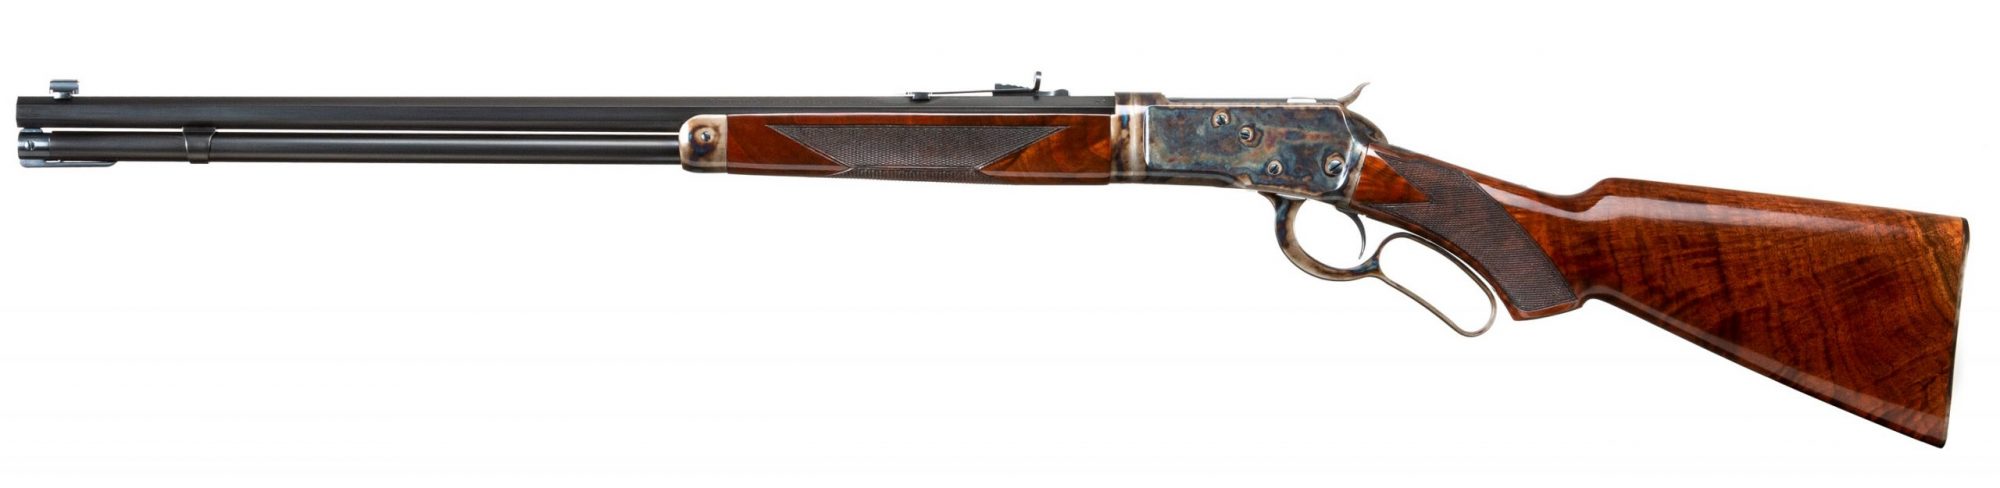 Photo of a Turnbull Finished Winchester 1892 Deluxe Takedown, featuring case color hardening, rust blue barrel and magazine tube finish, and hand-rubbed oil wood finish